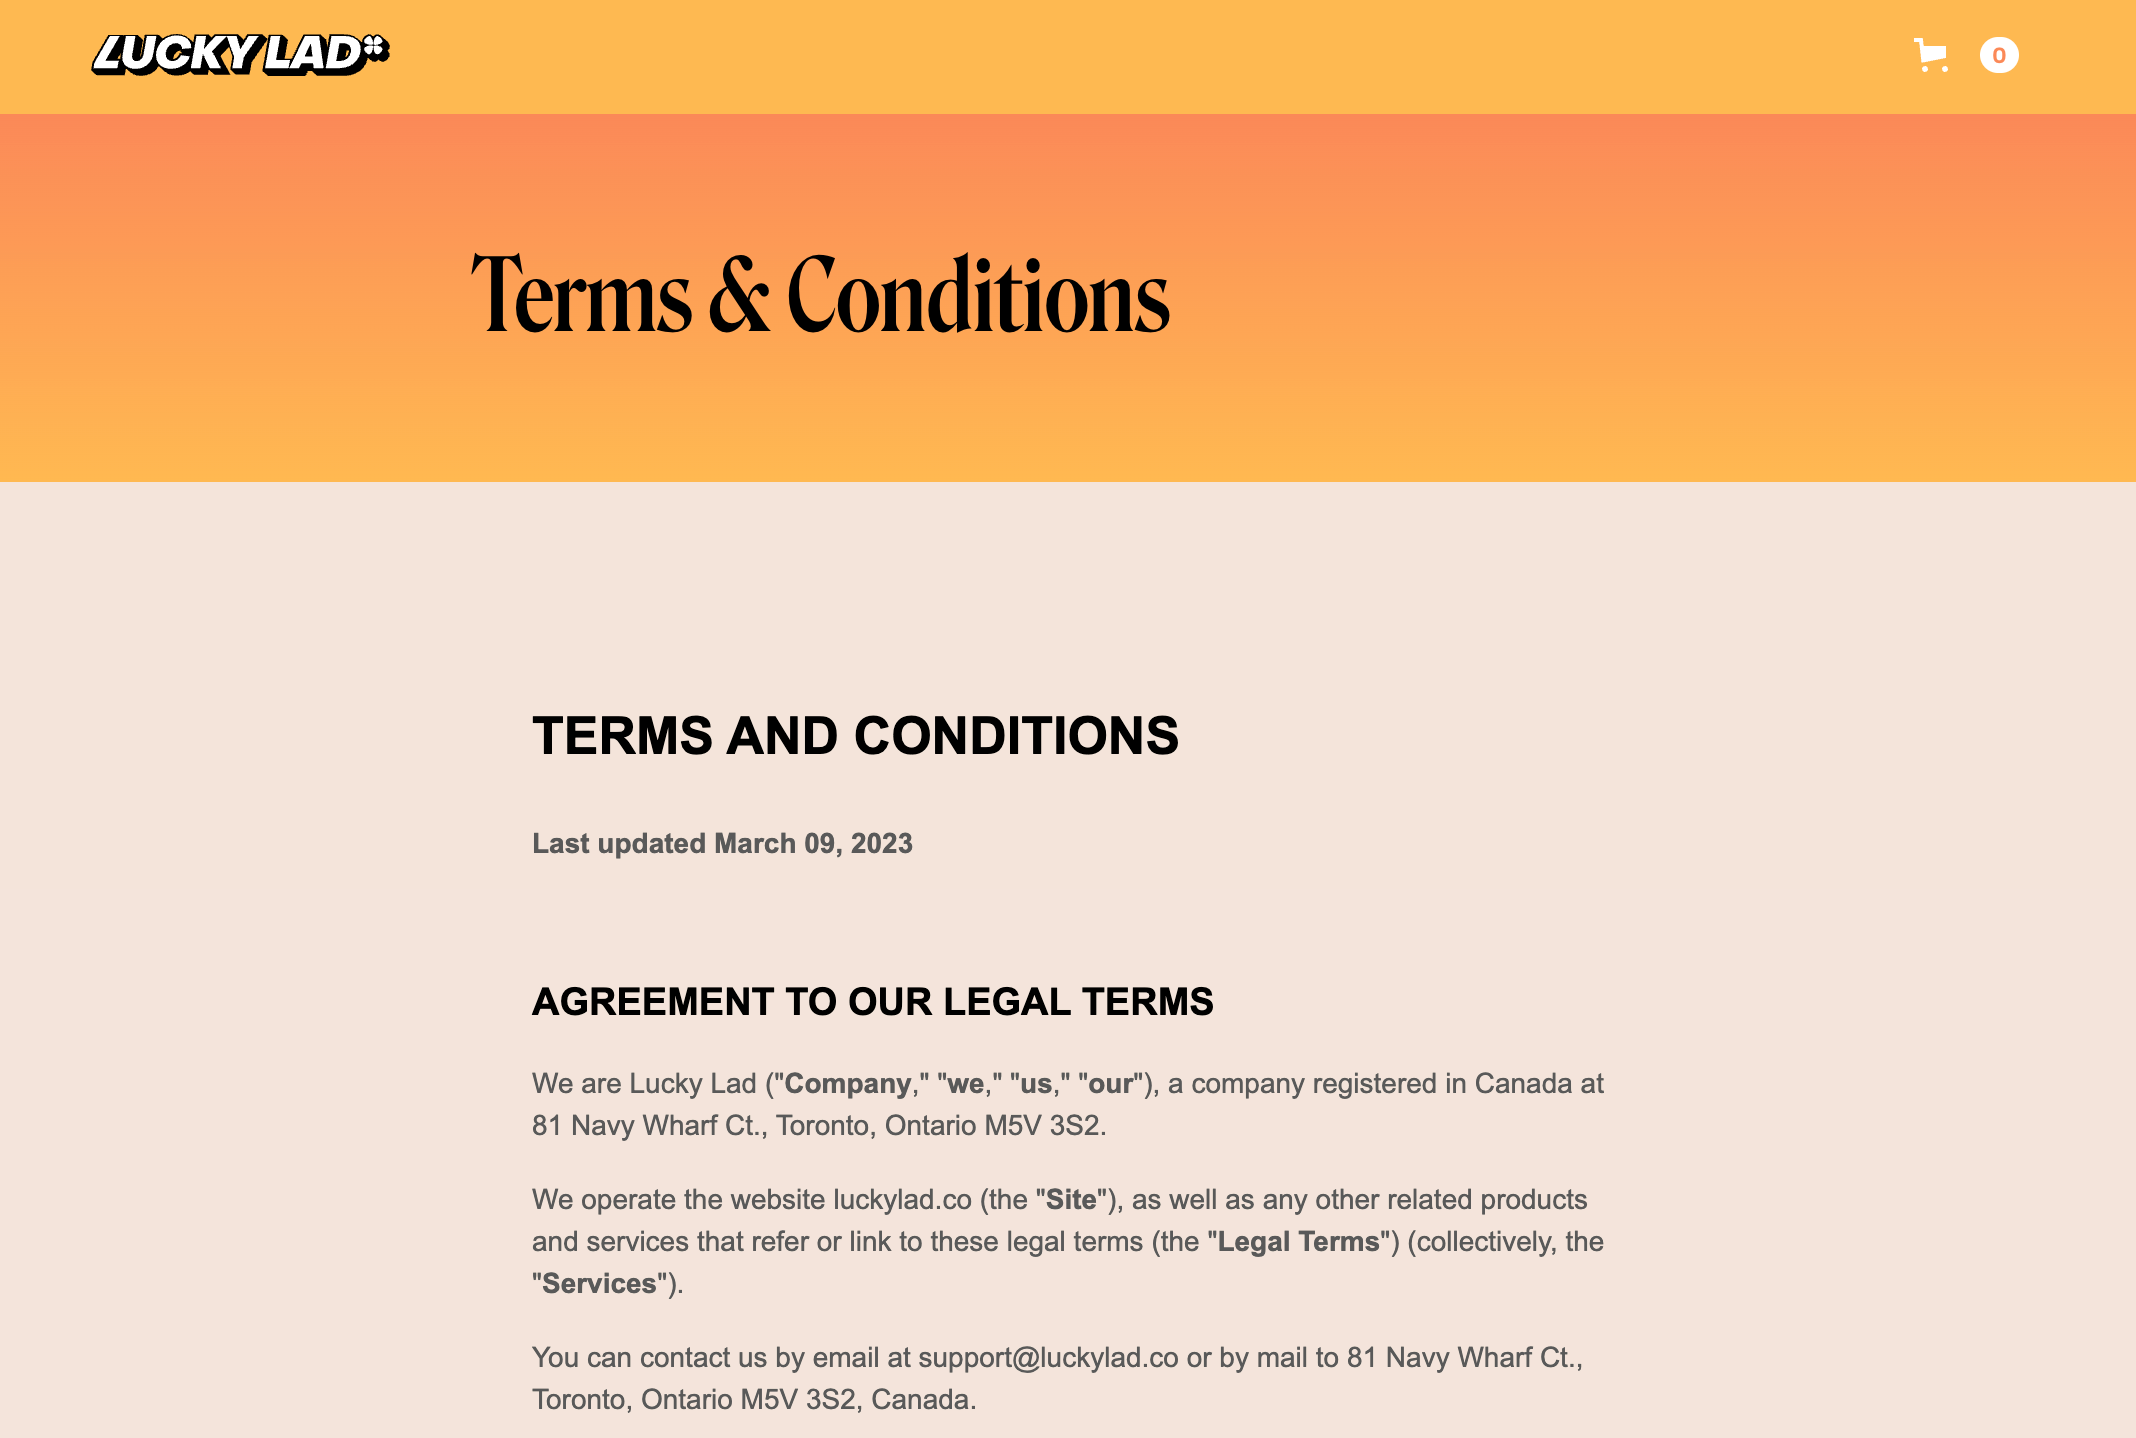 Ecommerce terms and conditions page for online business Lucky Lad